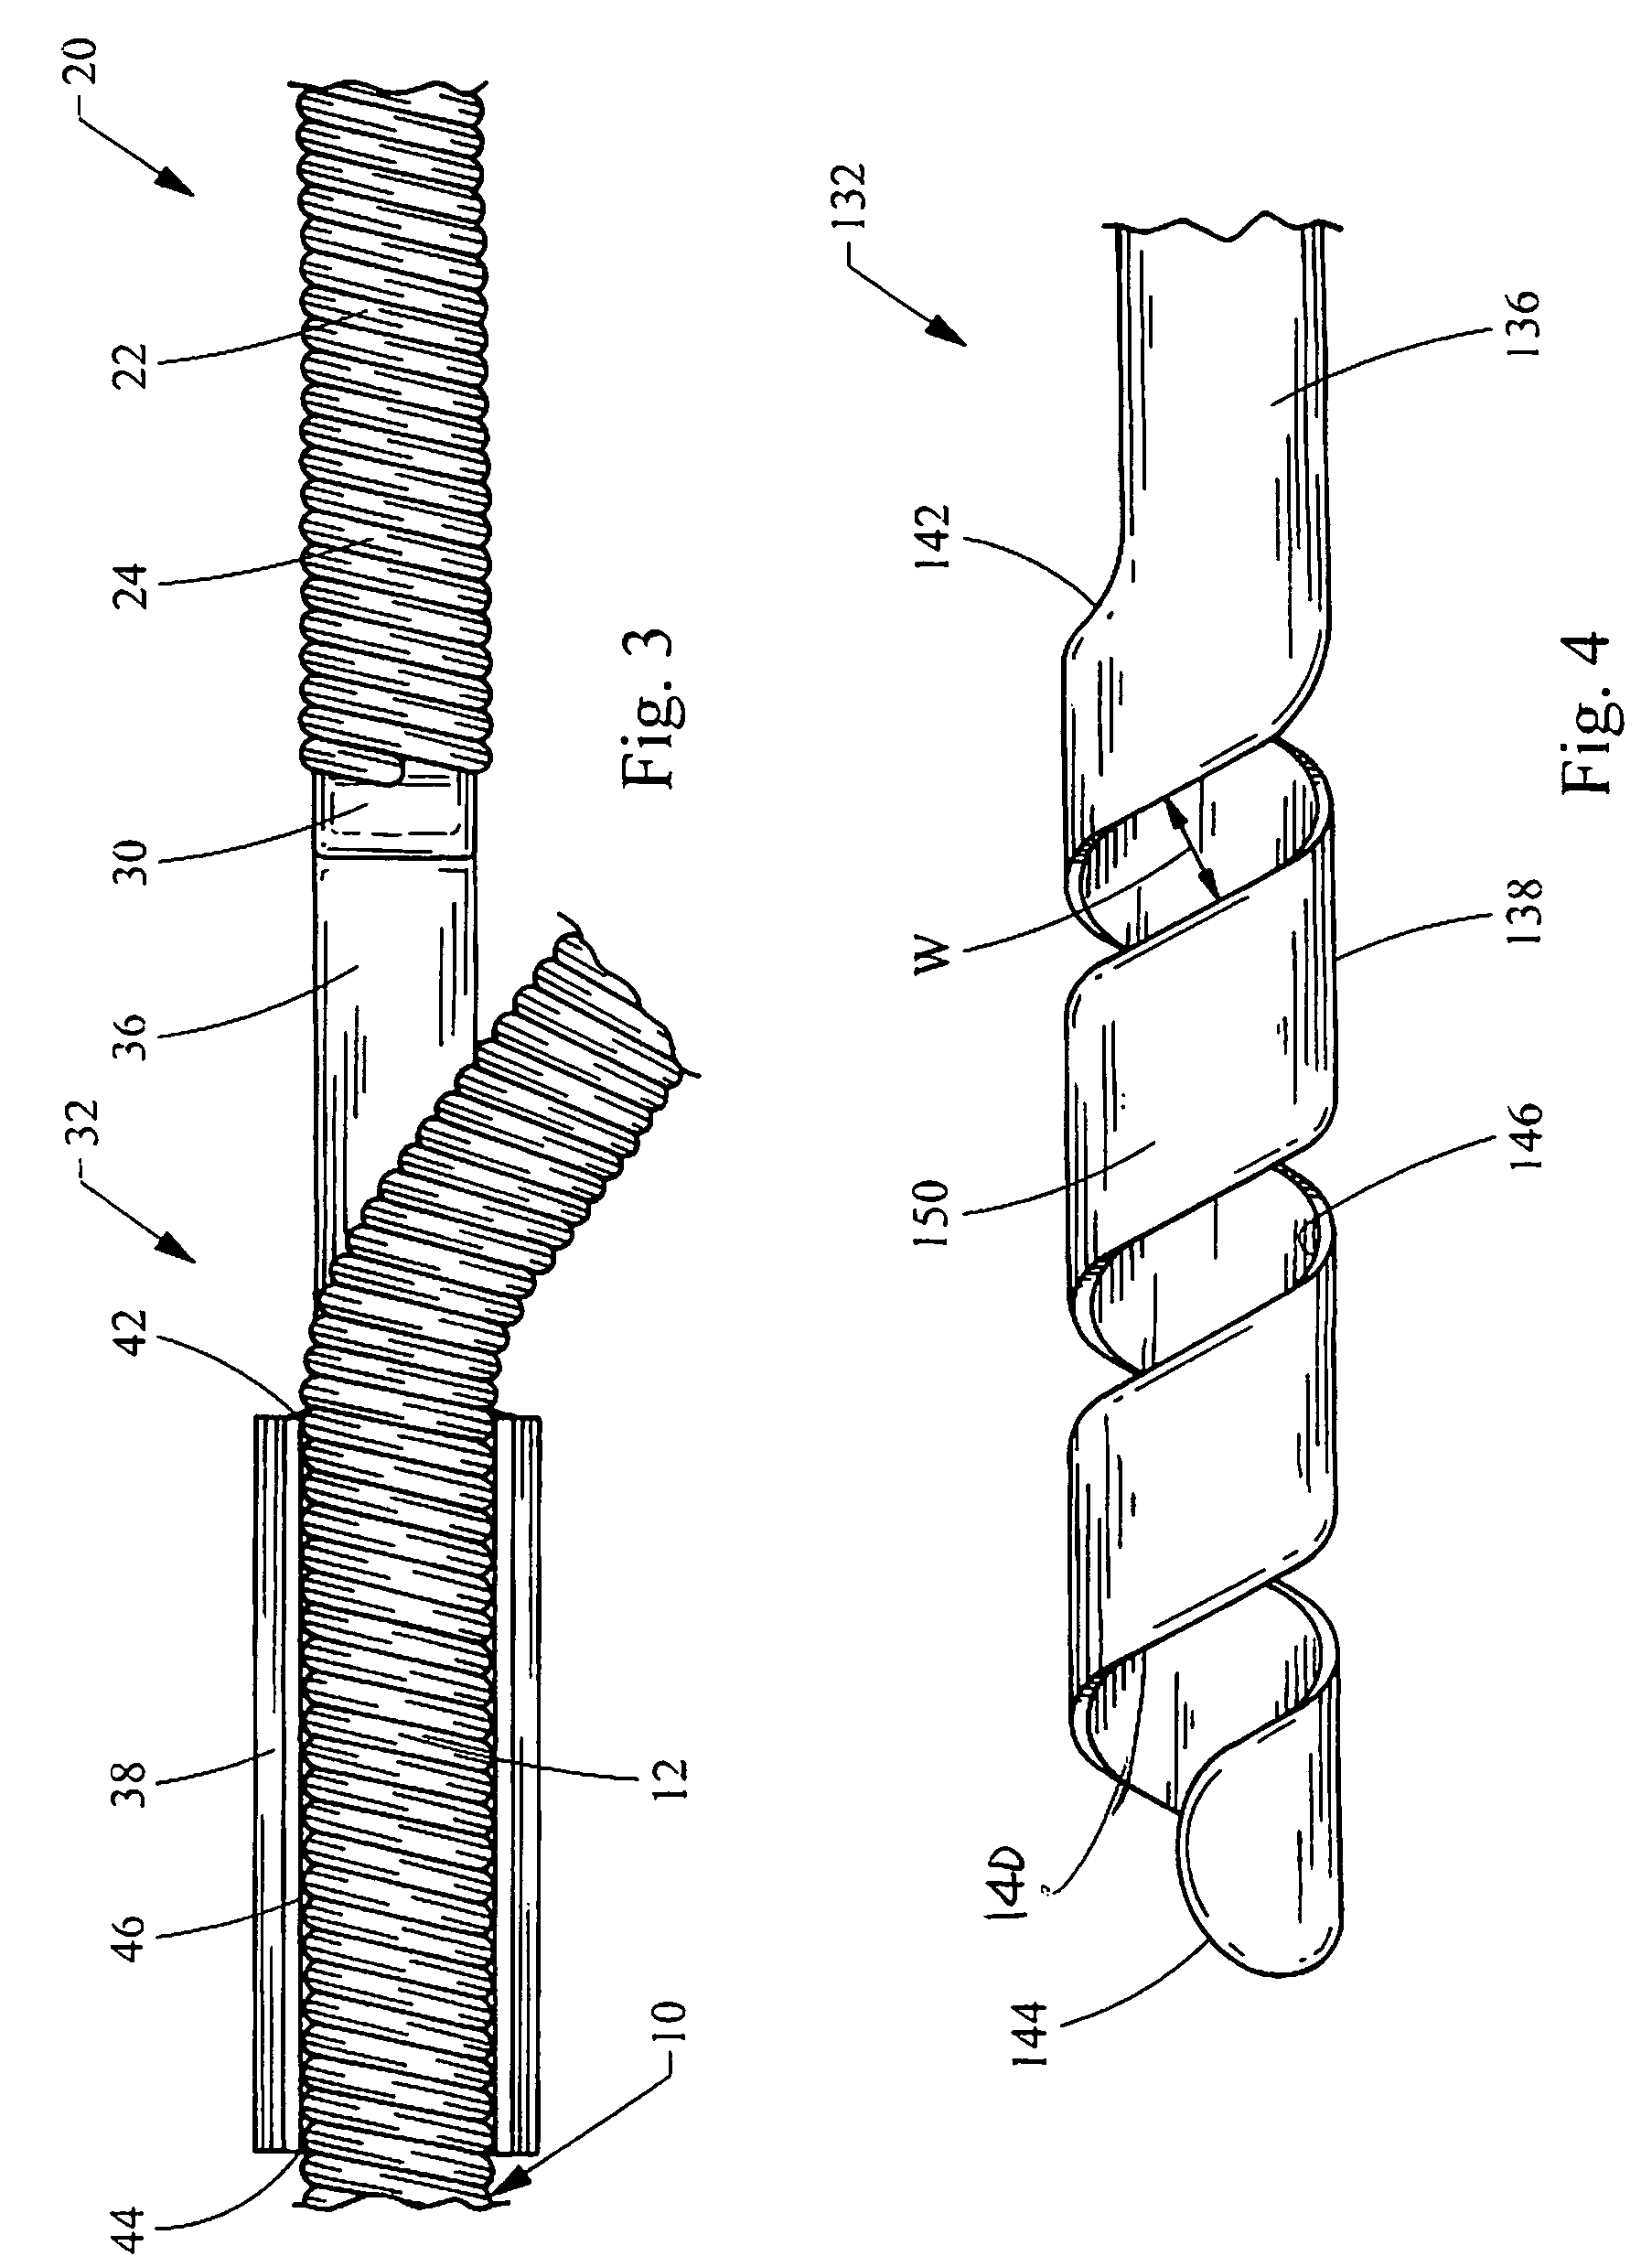 Wire guide having distal coupling tip for attachment to a previously introduced wire guide